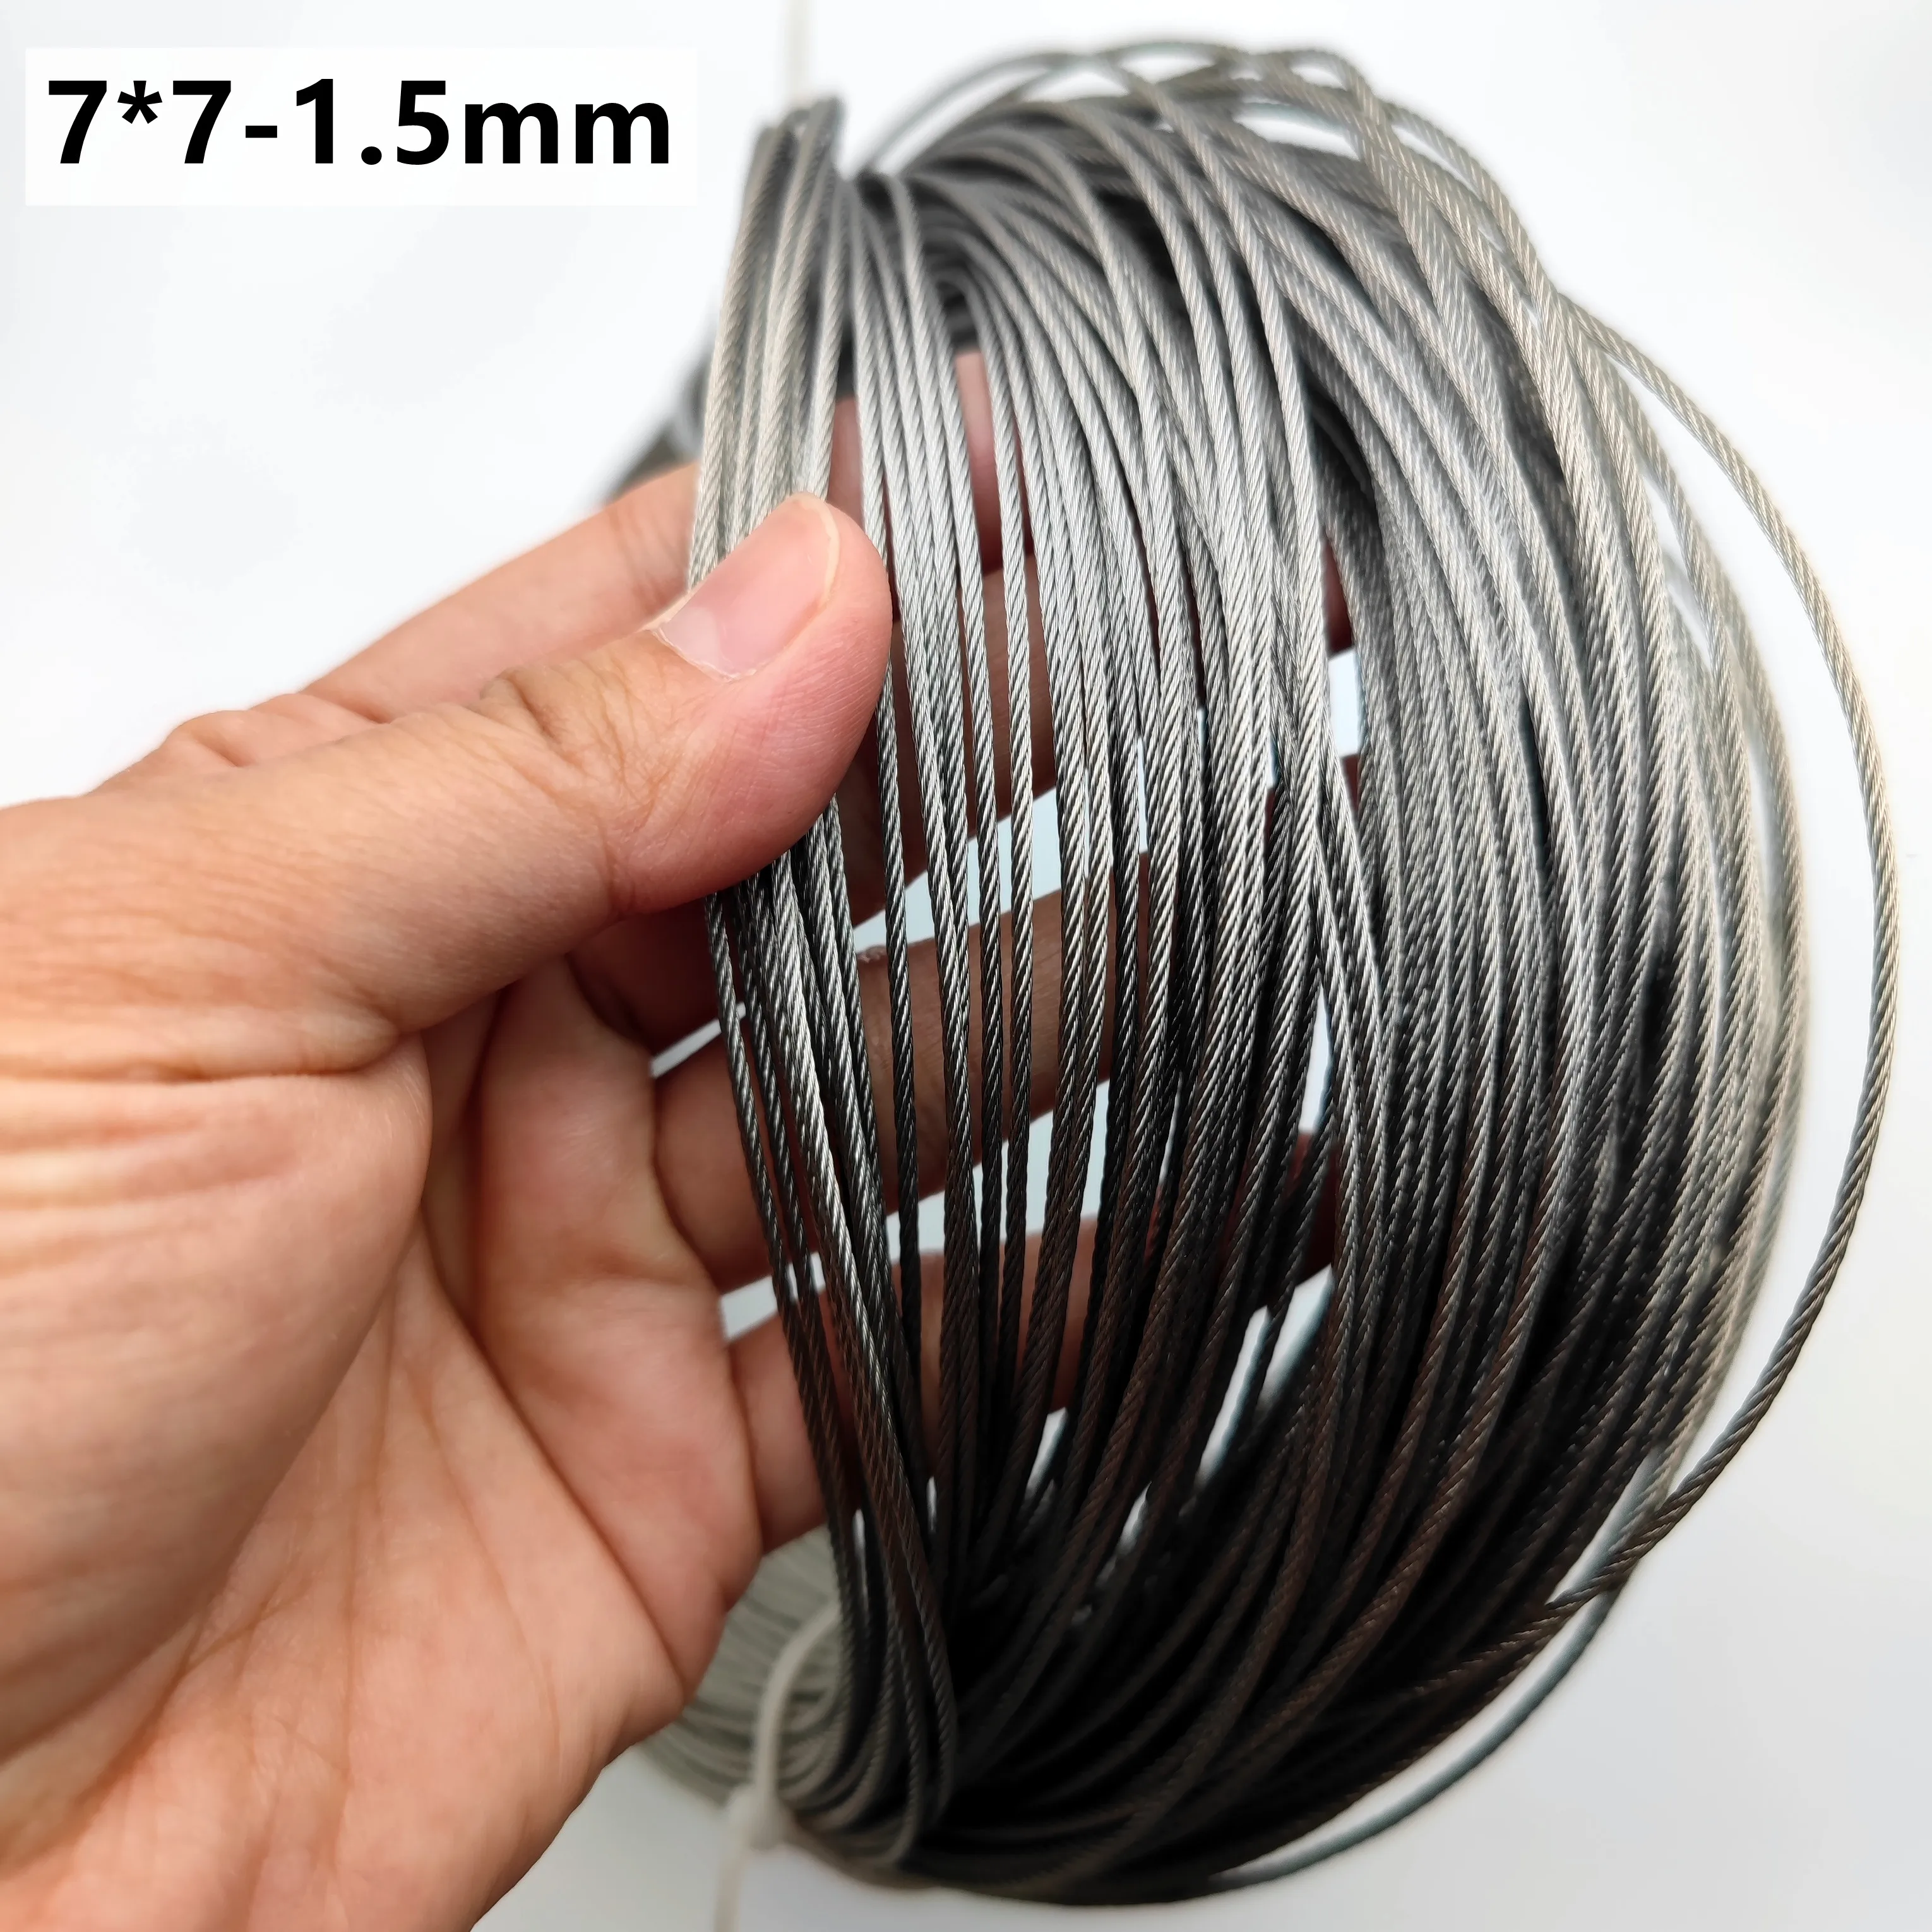 50M/100M/200M 1.5mm Diameter 7X7 Construction 304 Stainless steel Wire rope Alambre Softer Fishing Lifting Cable 50m 100m 0 8mm diameter 7x7 construction 304 stainless steel wire rope alambre softer fishing lifting cable